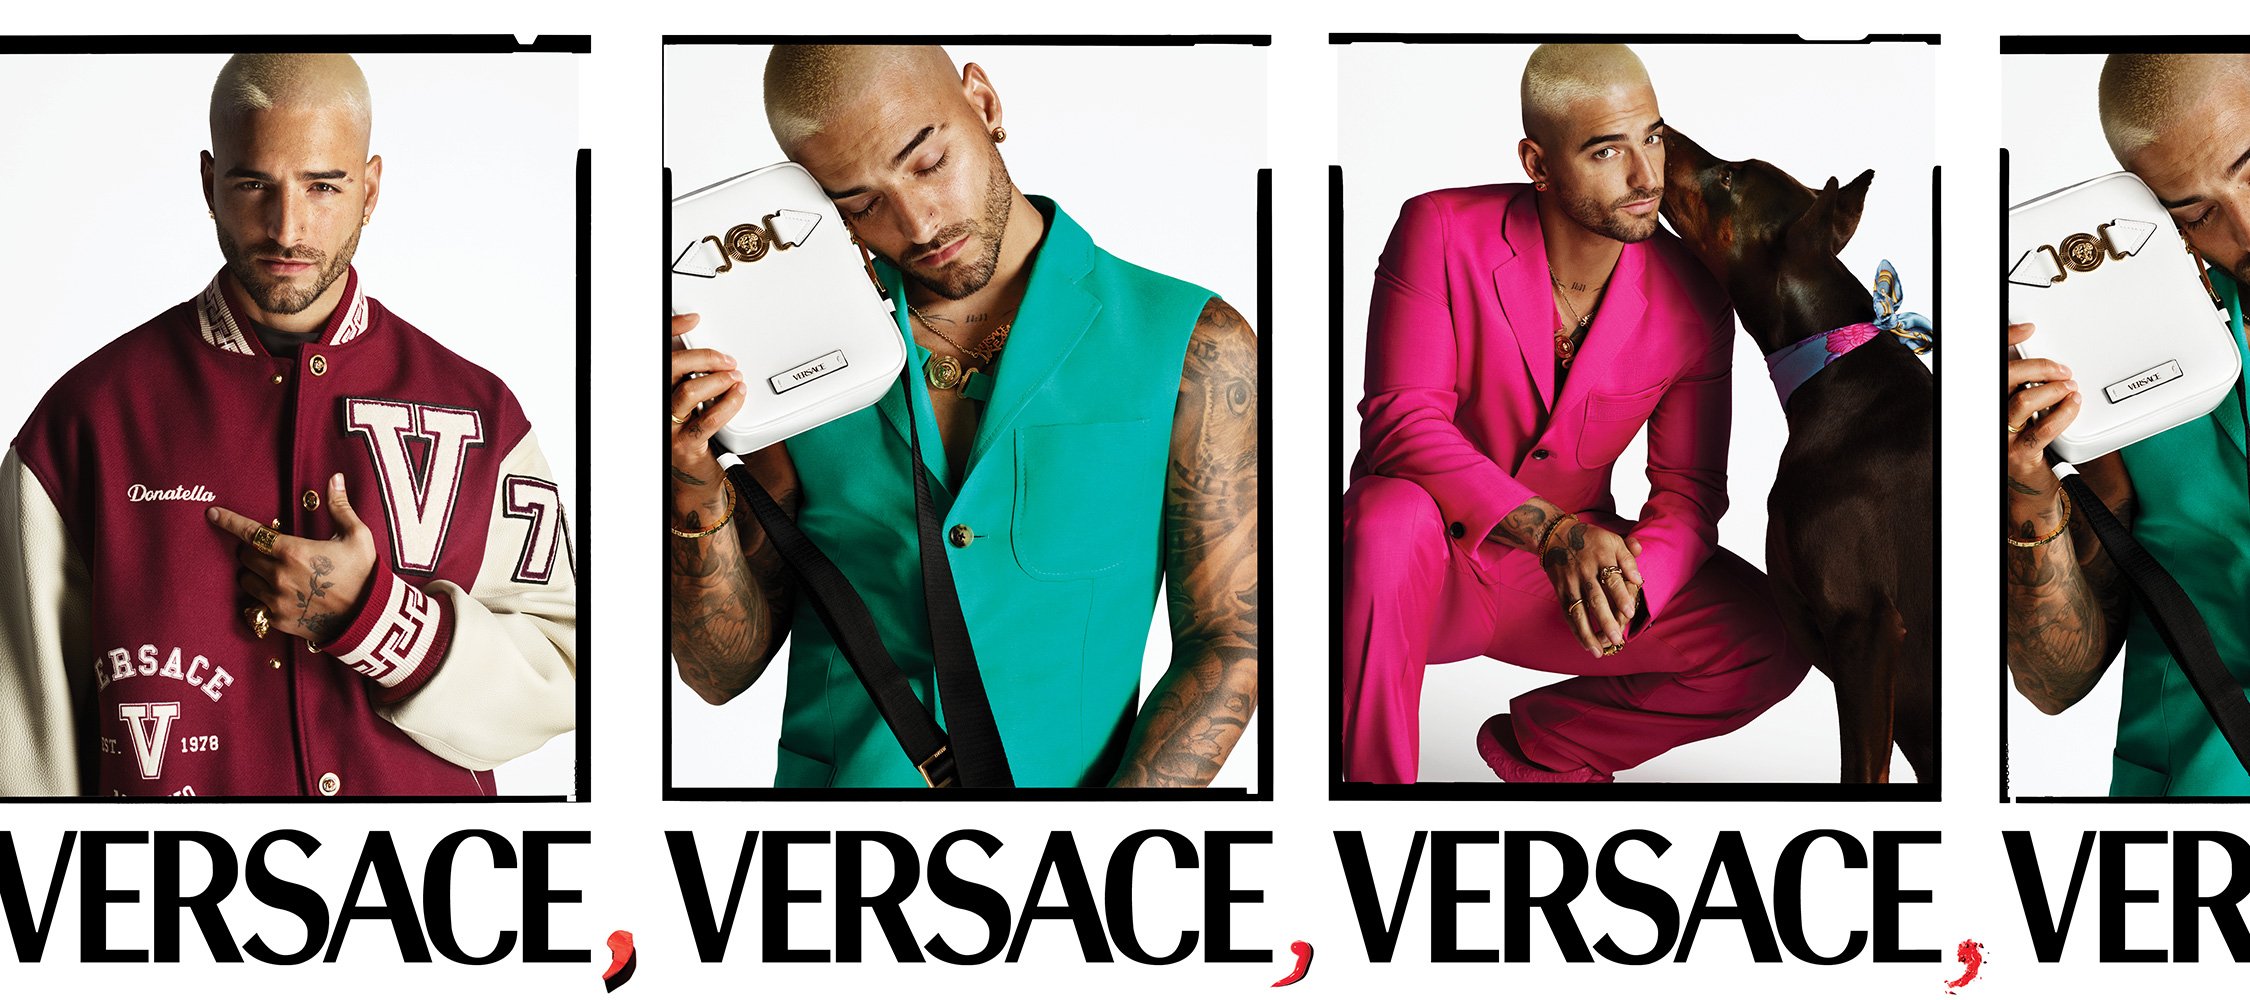 Maluma Crowned Fashion King as New Face of Versace